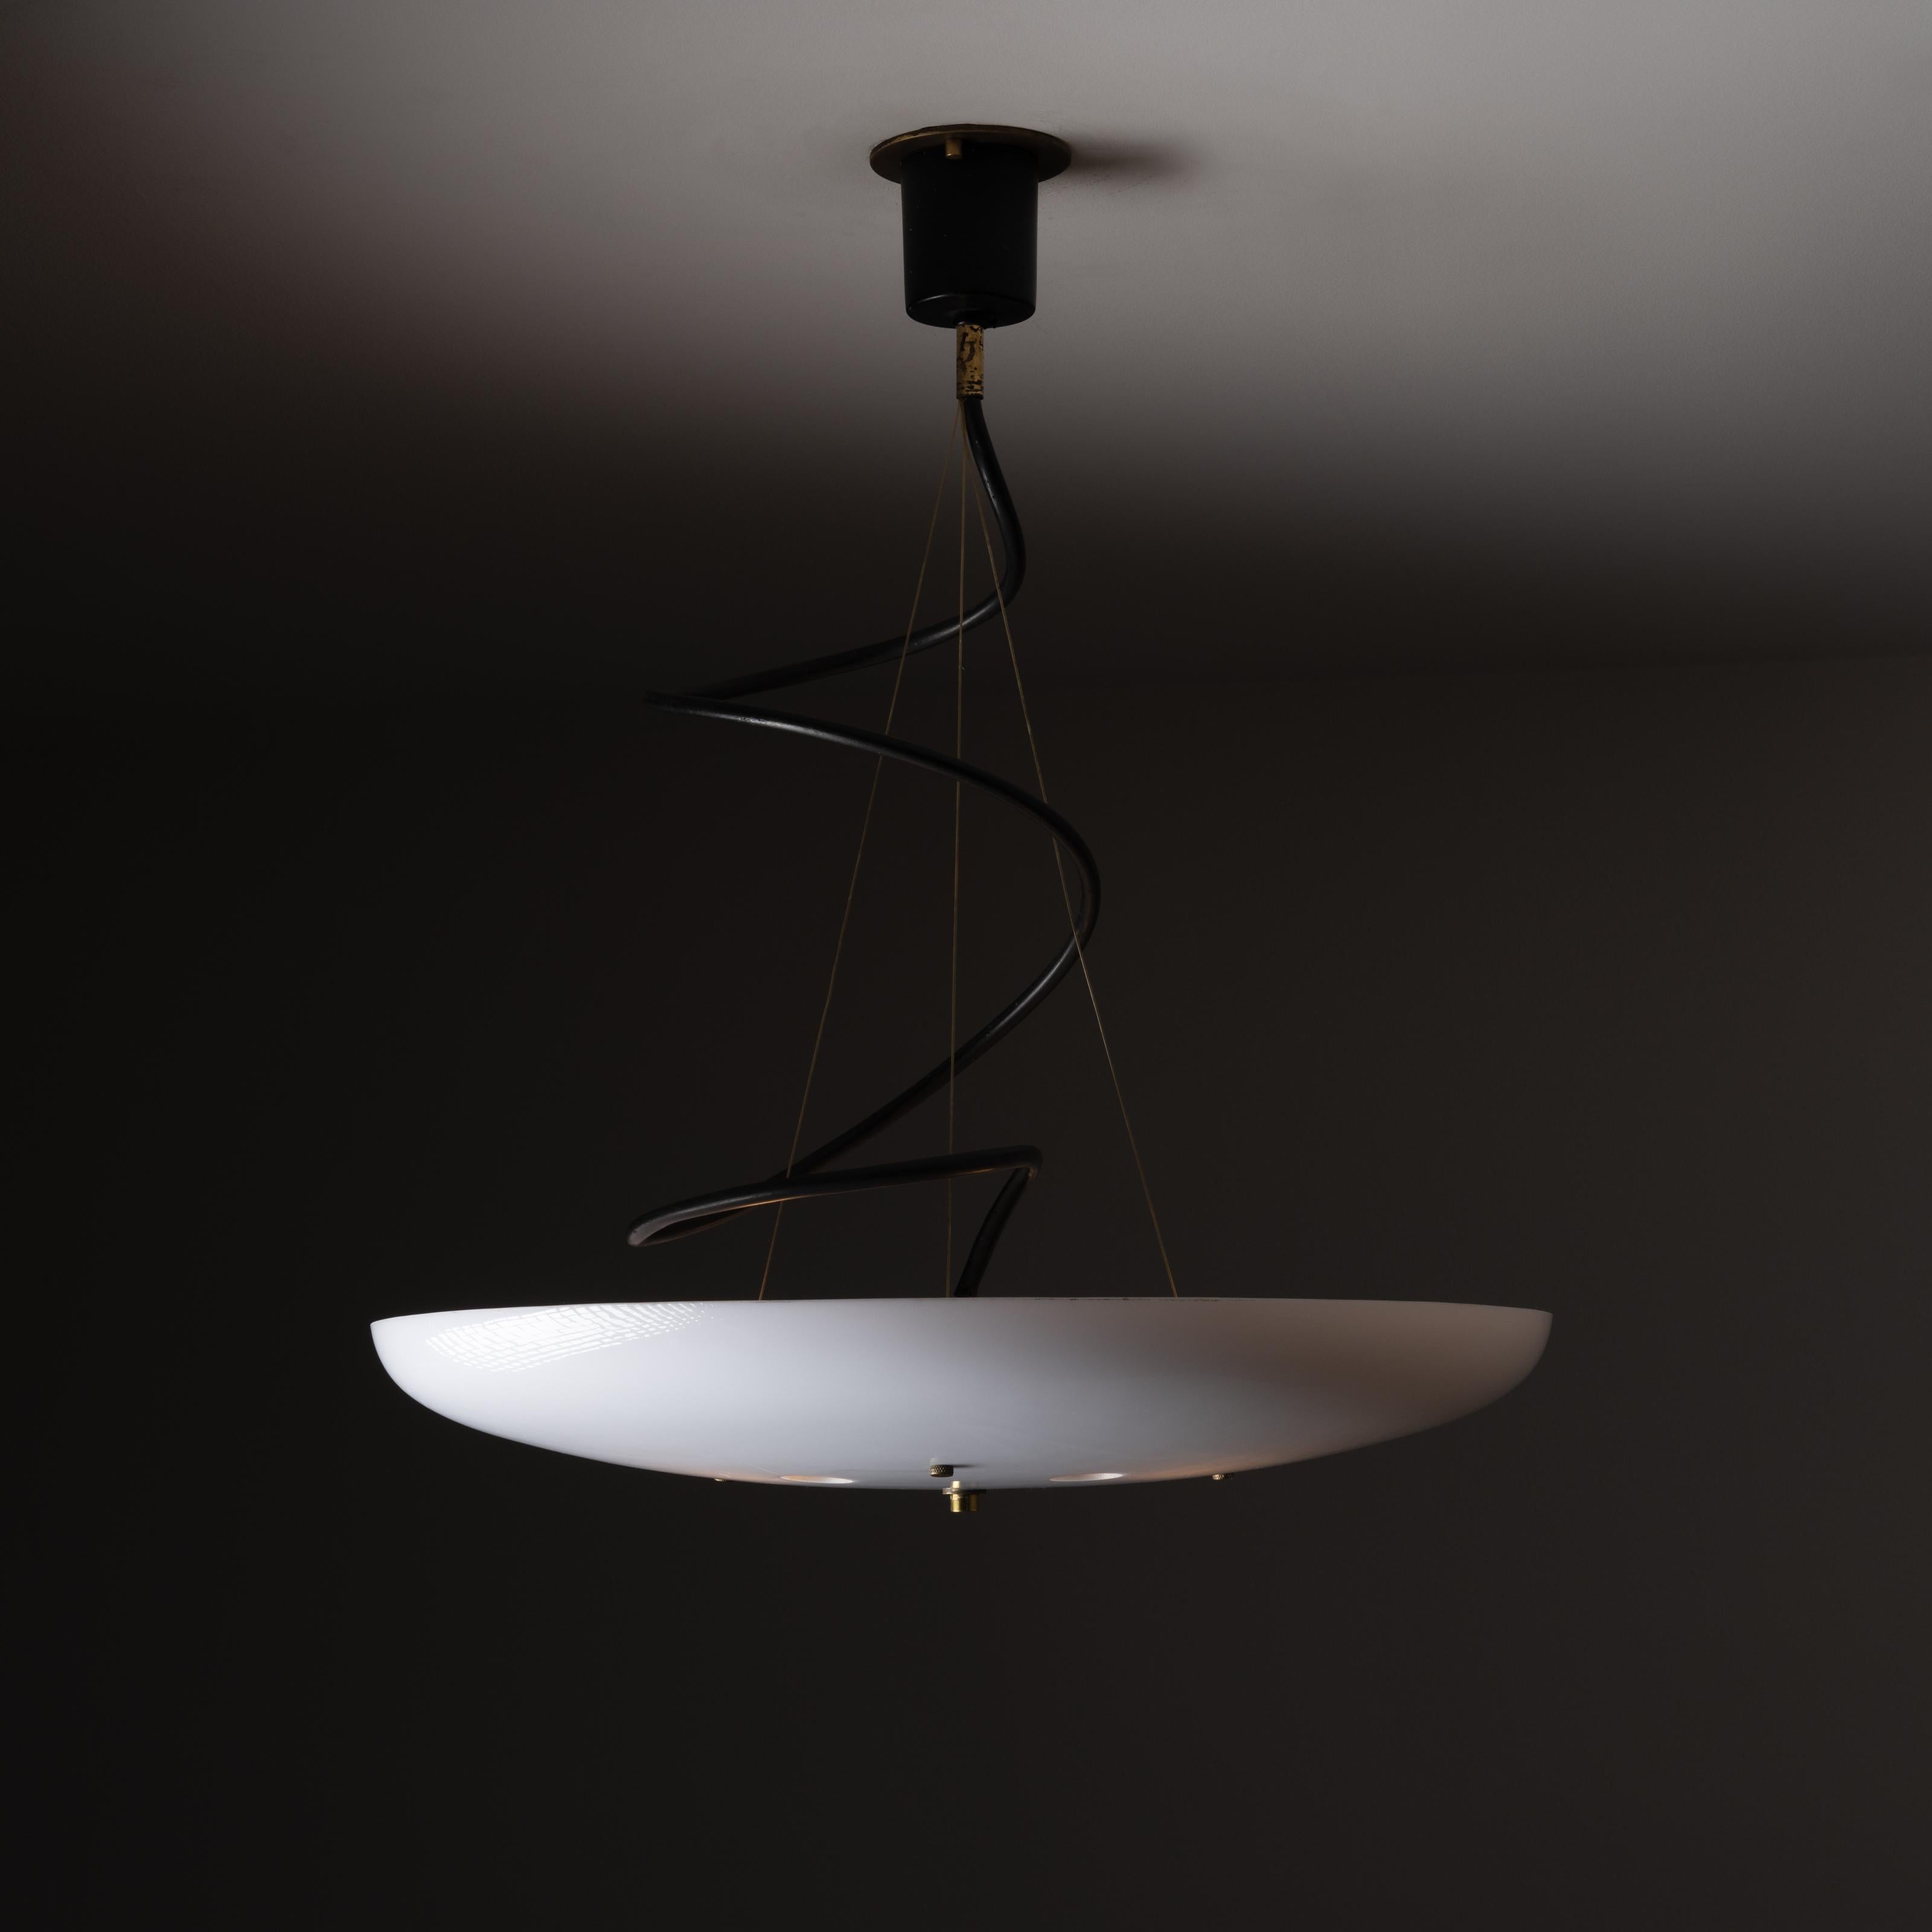 Ceiling light by Stilnovo. Designed and manufactured in Italy, circa 1960s. Suspended pendant with coiled wiring, and circular acrylic shell with five small circular die-cuts. We recommend using three 40w maximum E27 bulbs. Rewired for US standards.